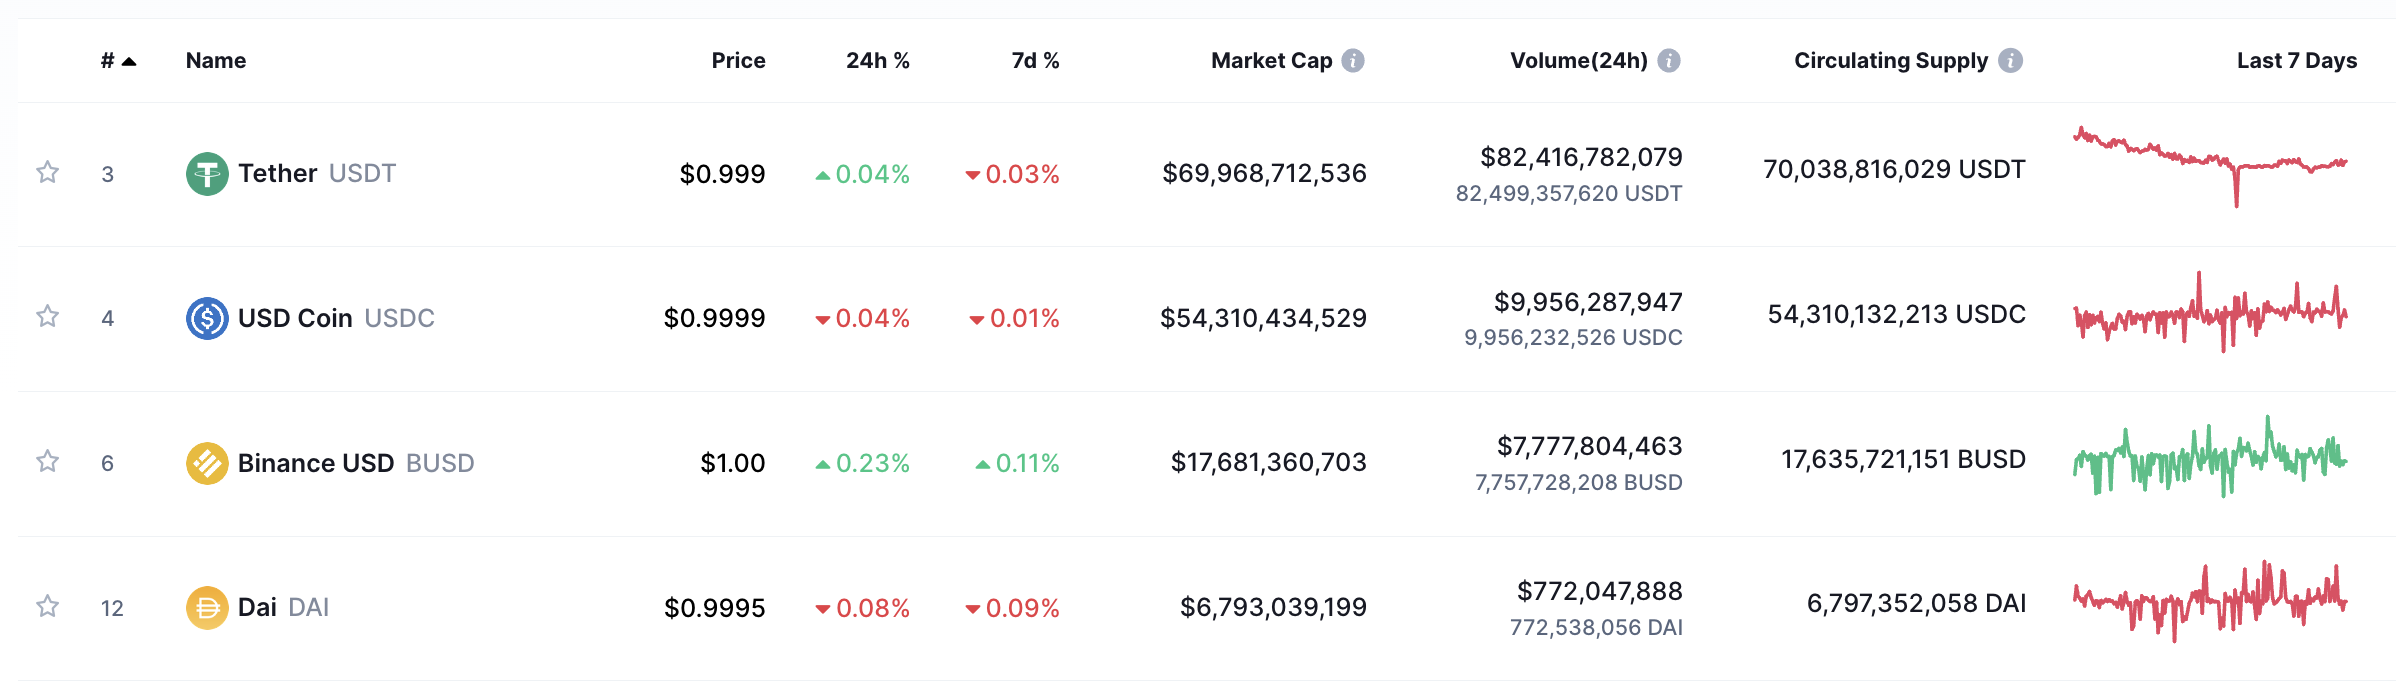 List of the four biggest stablecoins by market capitalization